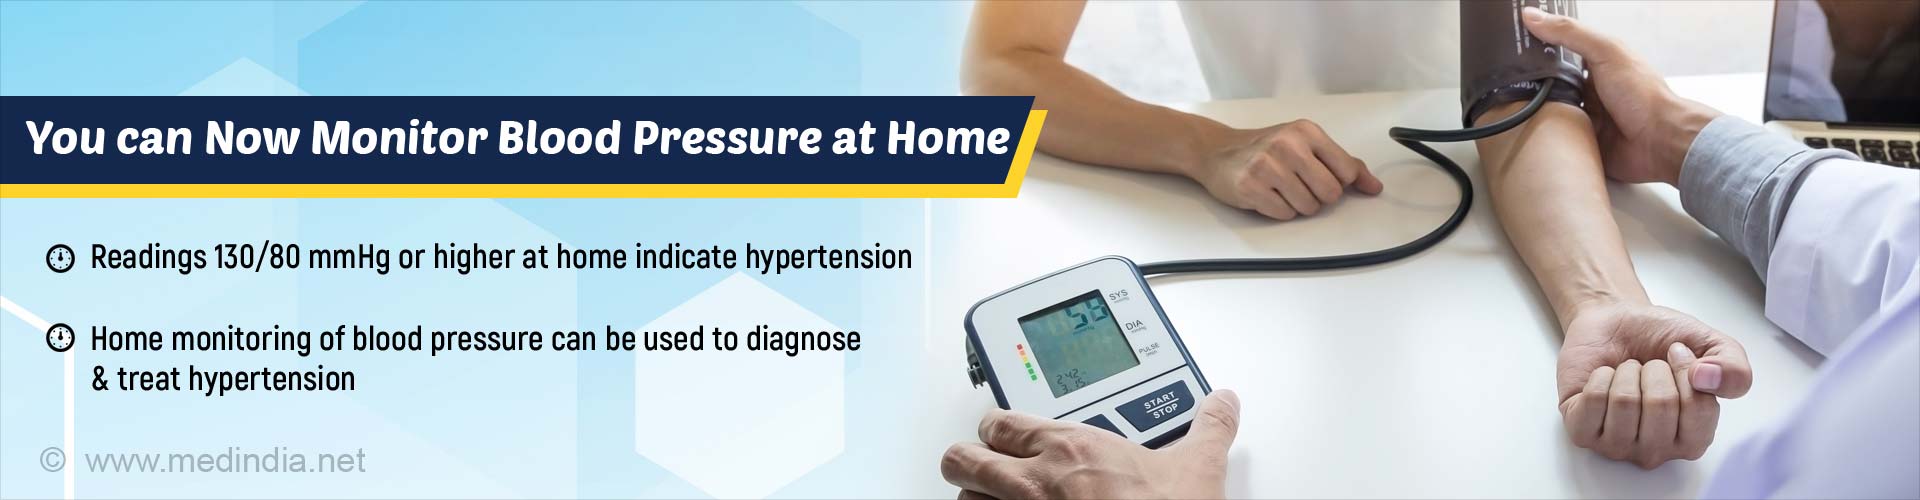 You can now monitor blood pressure at home. readings 130/80 mmHg or higher at home indicate hypertension. home monitoring of blood pressure can be used to diagnose and treat hypertension.